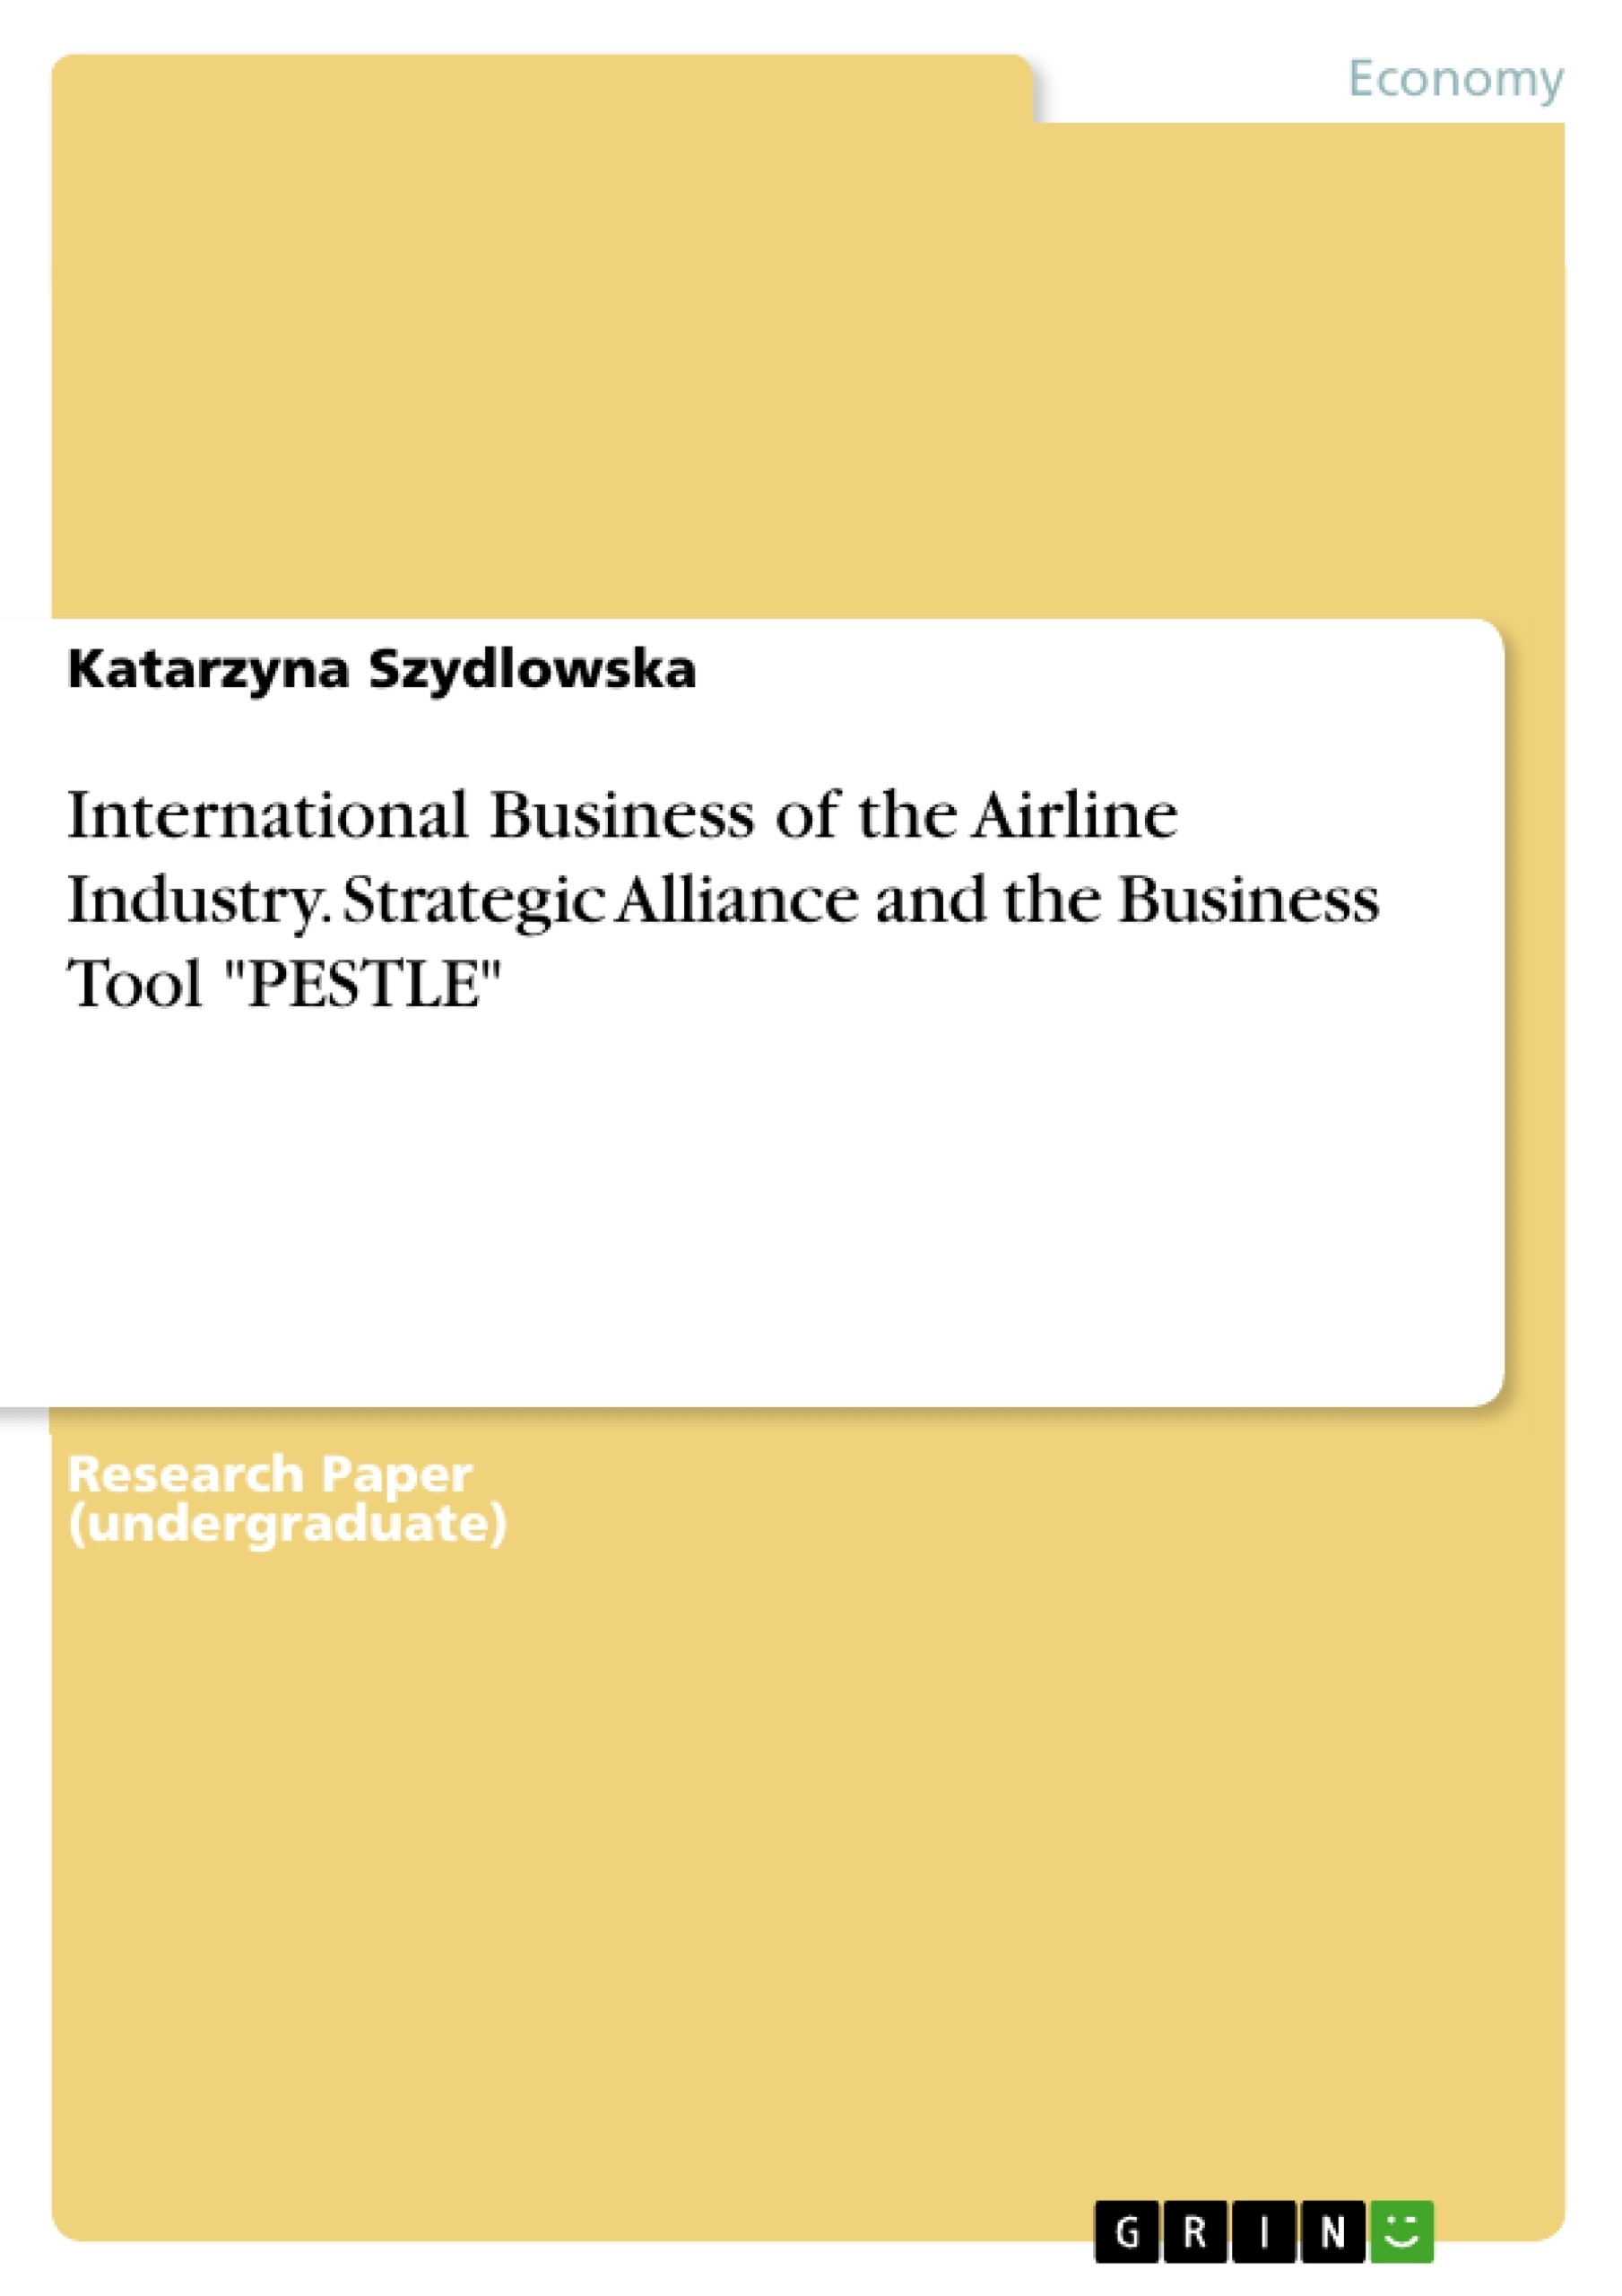 Titel: International Business of the Airline Industry. Strategic Alliance and the Business Tool "PESTLE"